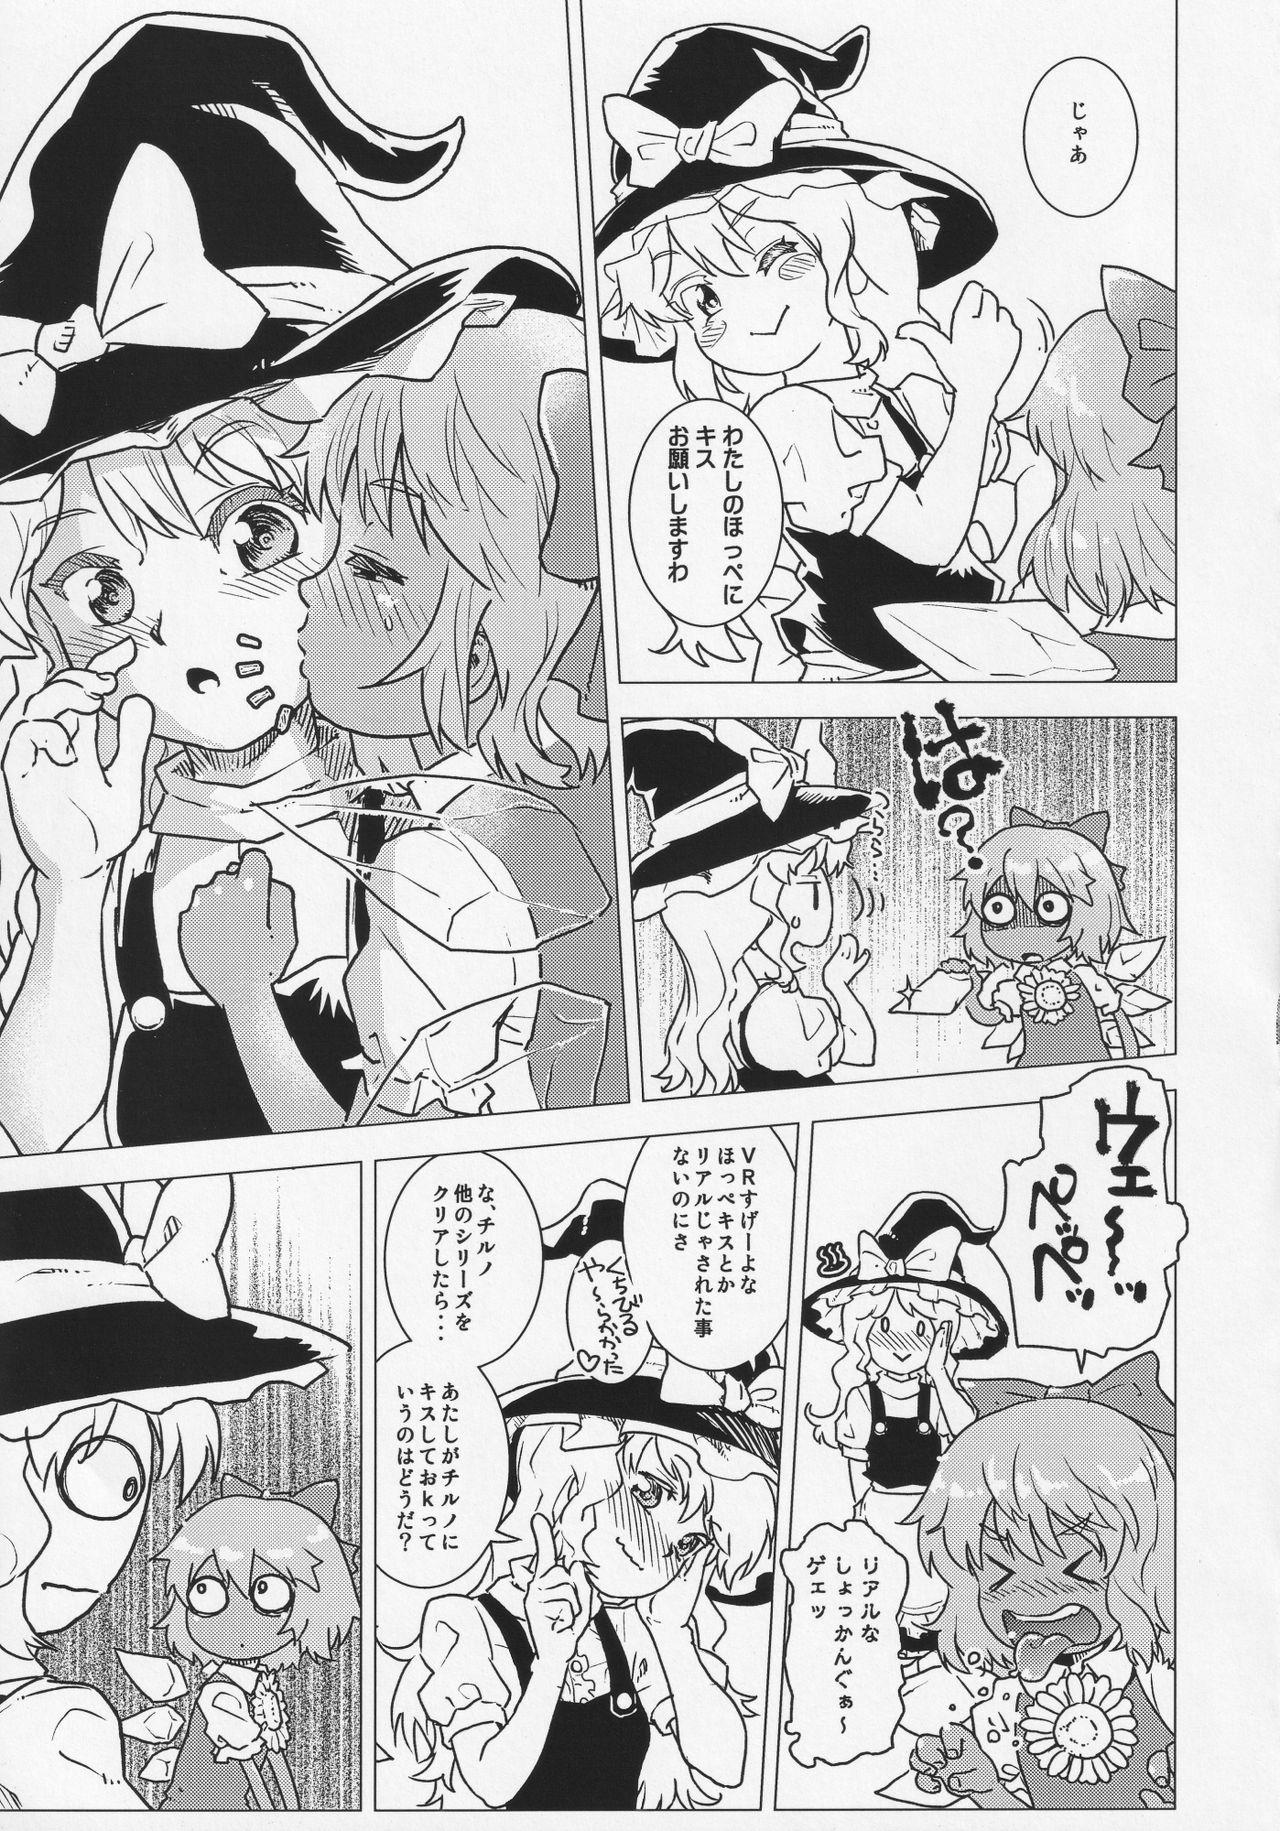 Vintage Ready Player Nine - Touhou project Cumfacial - Page 8